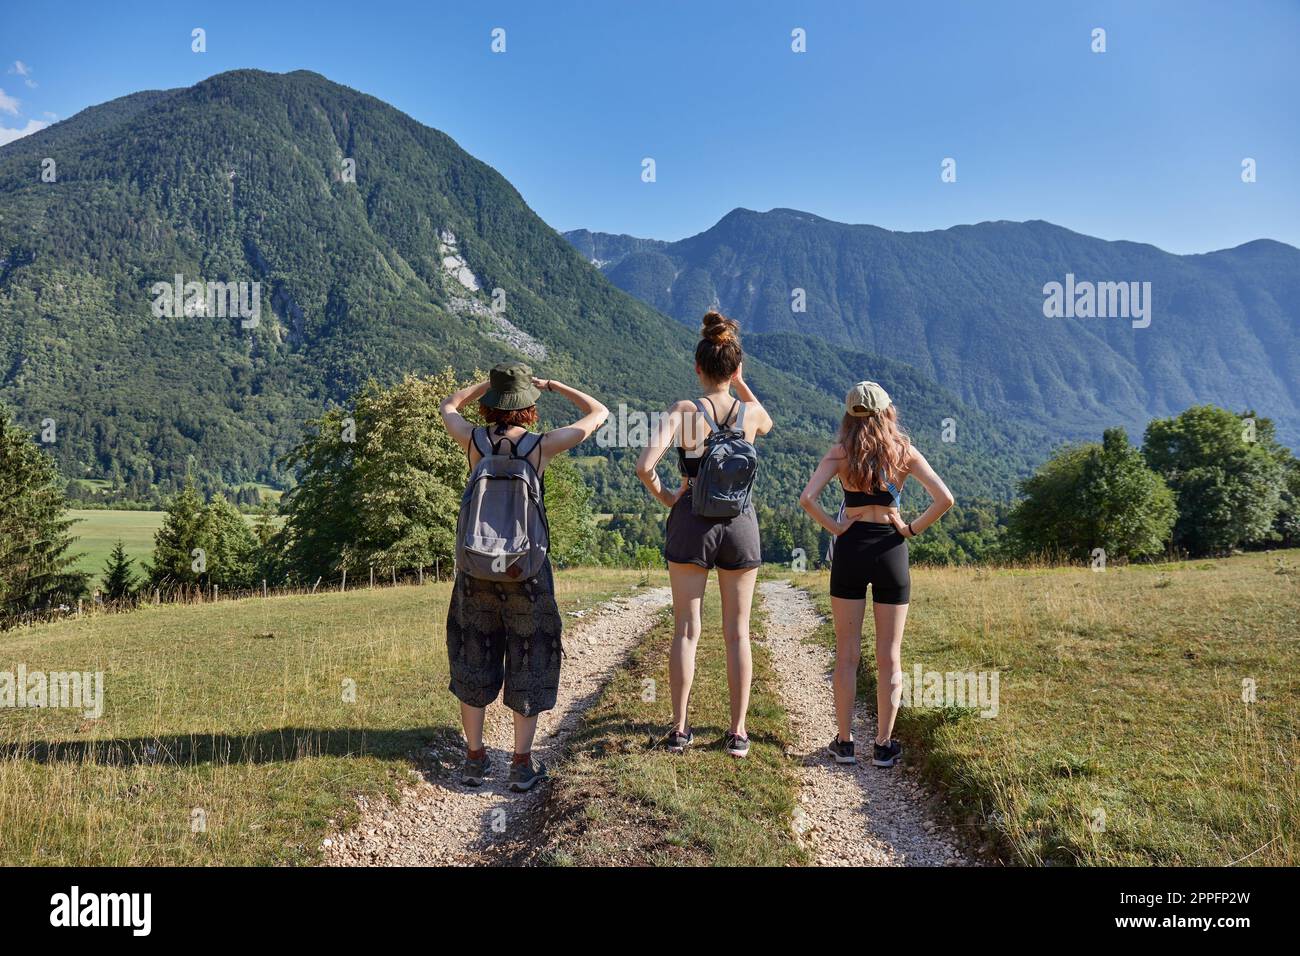 Girls hiking in the Alps, summer mountain landscape Stock Photo